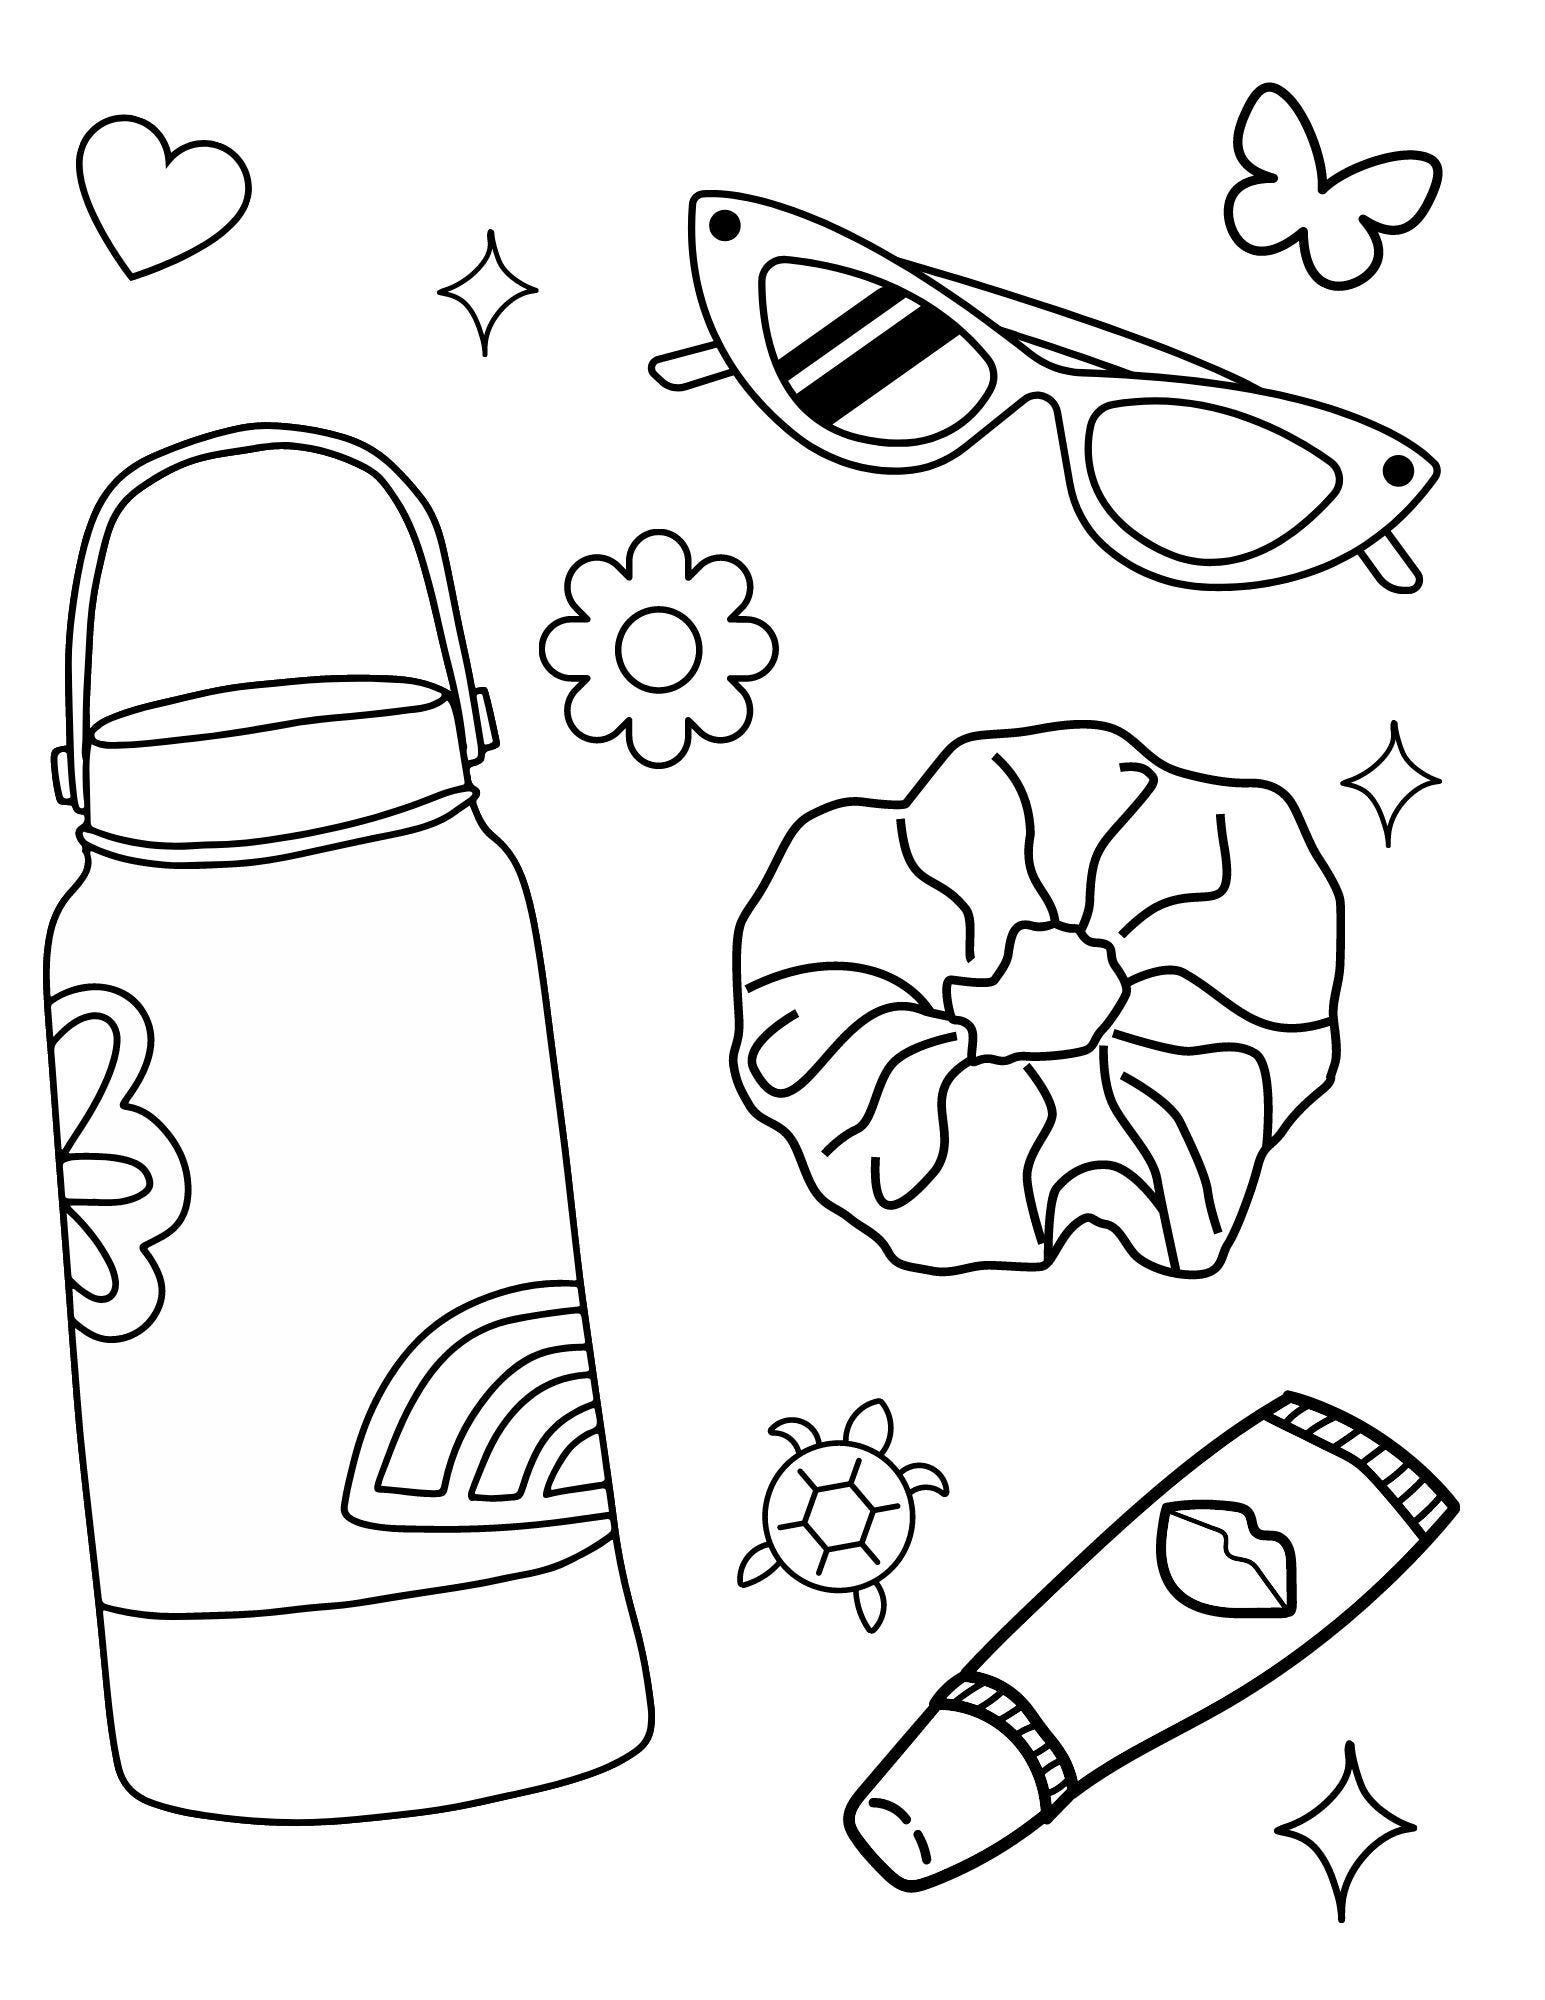 vsco-girl-coloring-pages-teens-coloring-pages-vsco-aesthetic-etsy-denmark